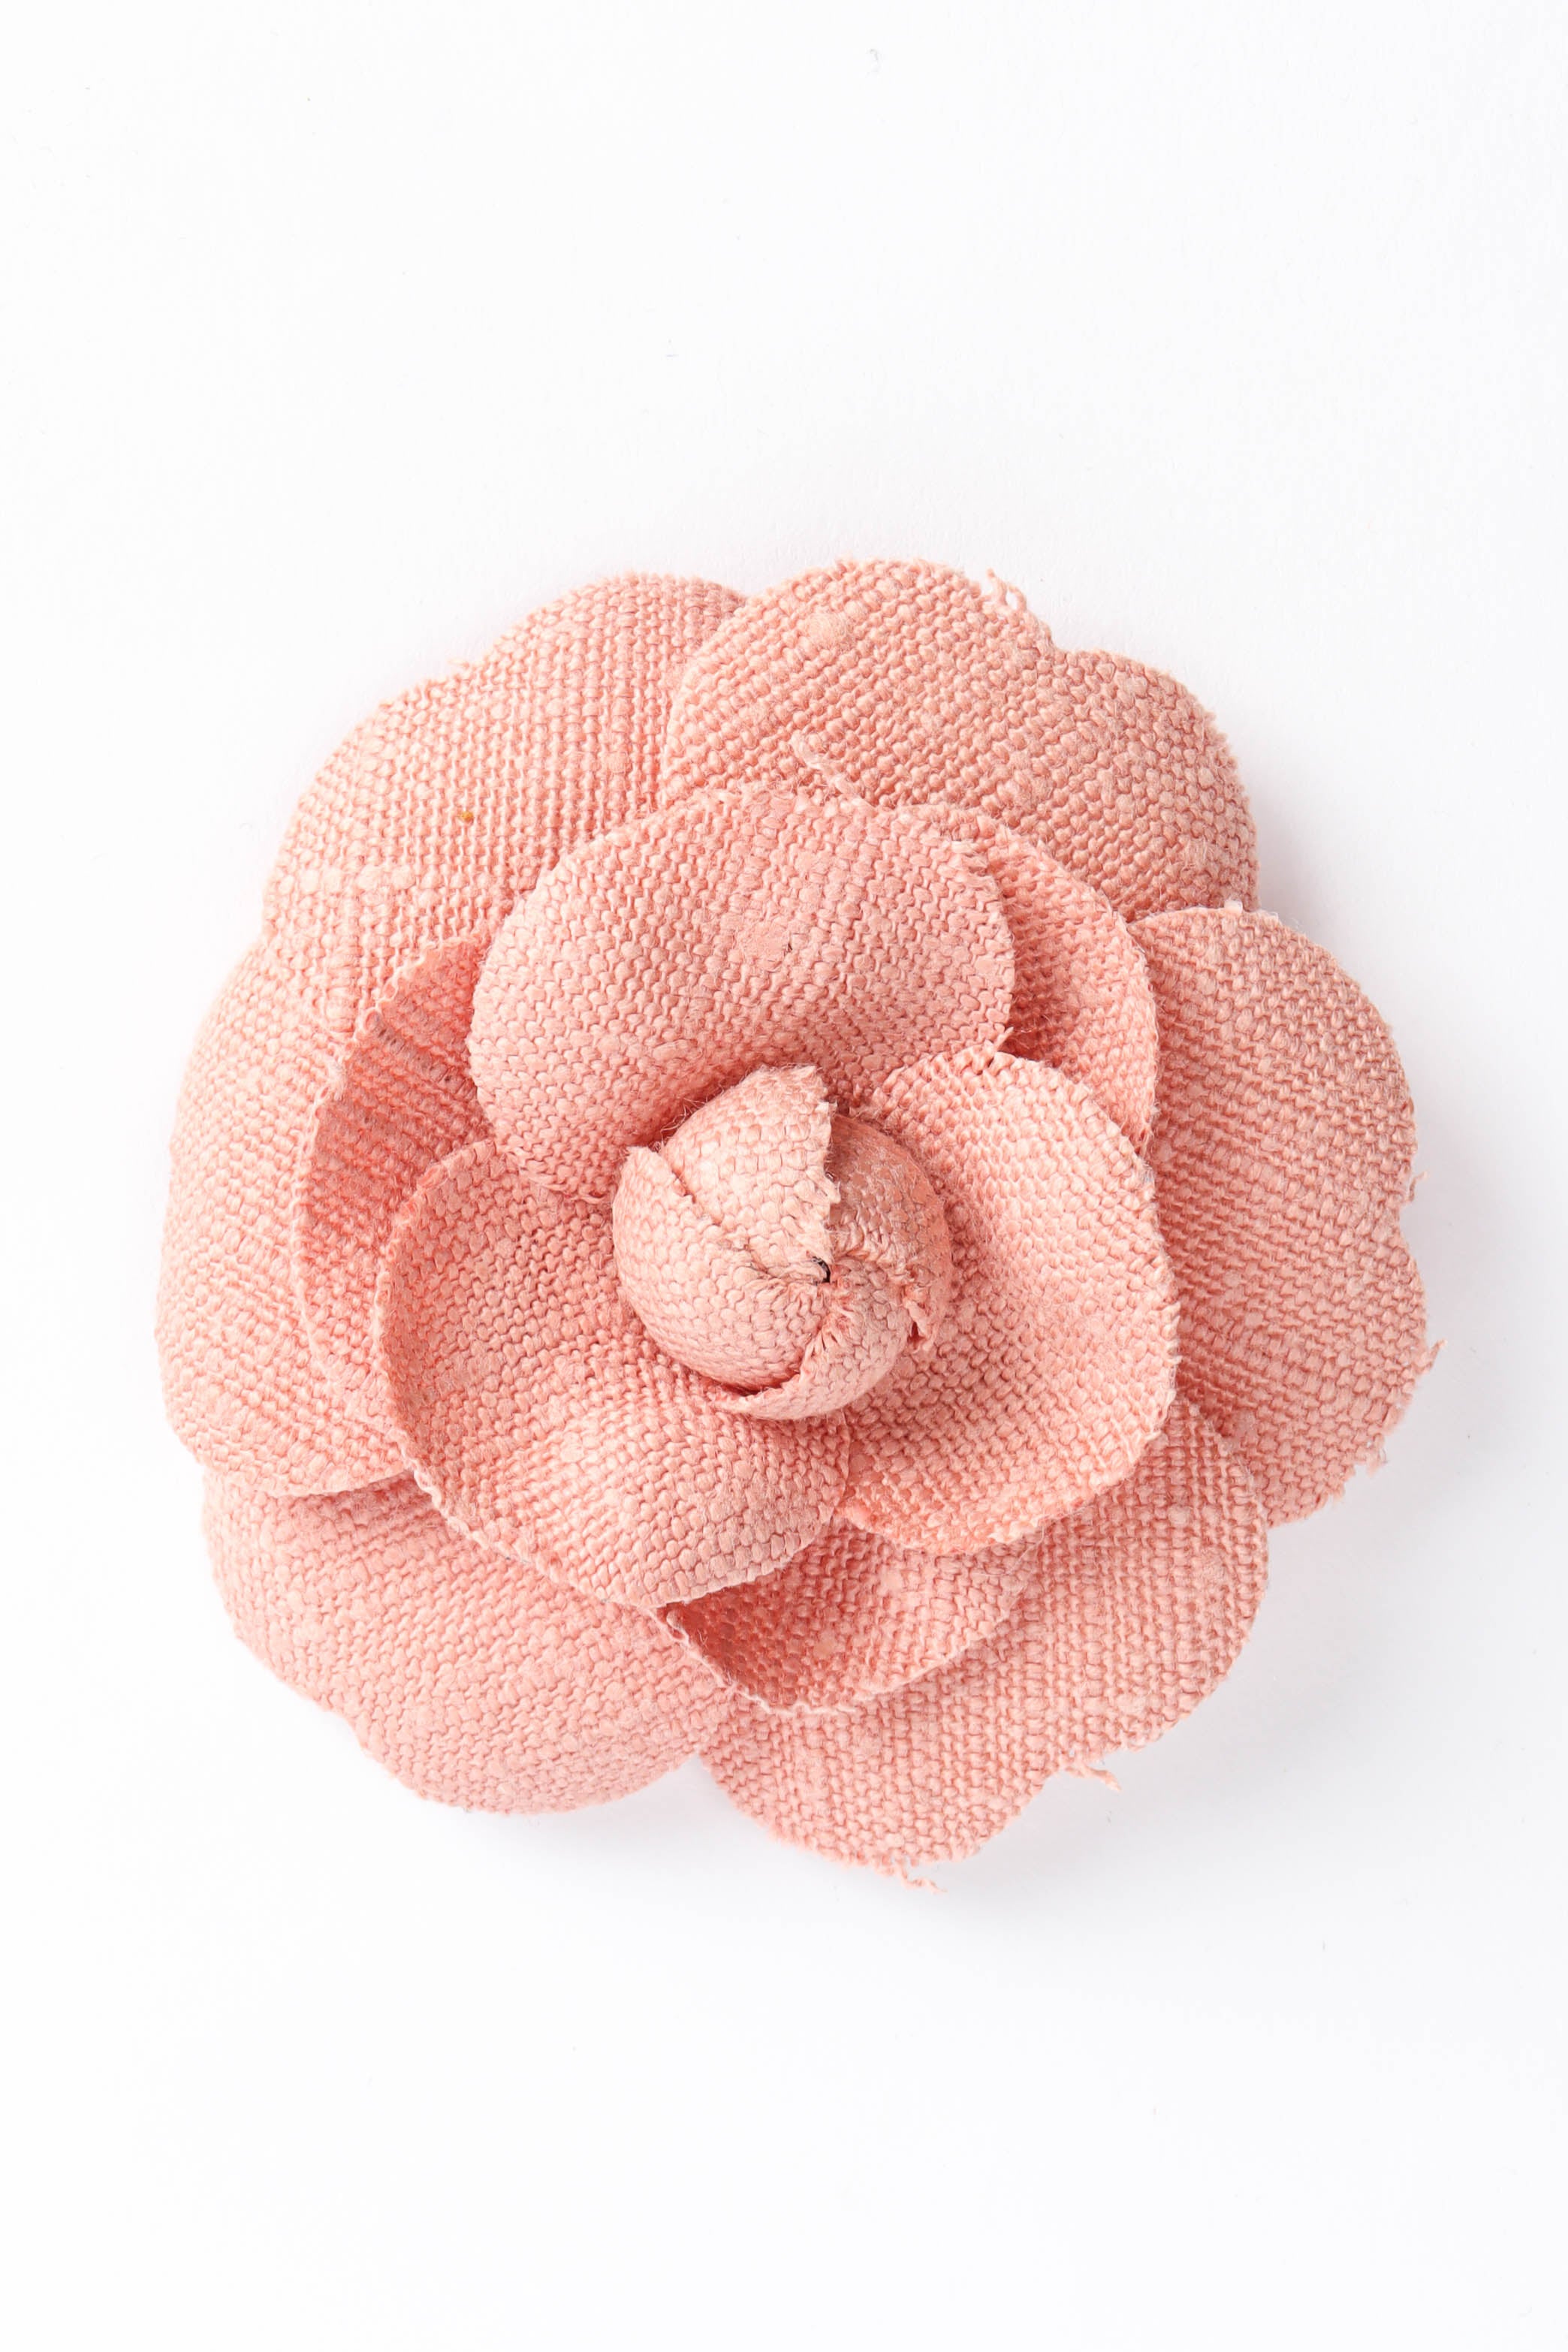 Chanel White Camellia Flower Lapel Pin Brooch in Chanel Gift Box – Modig